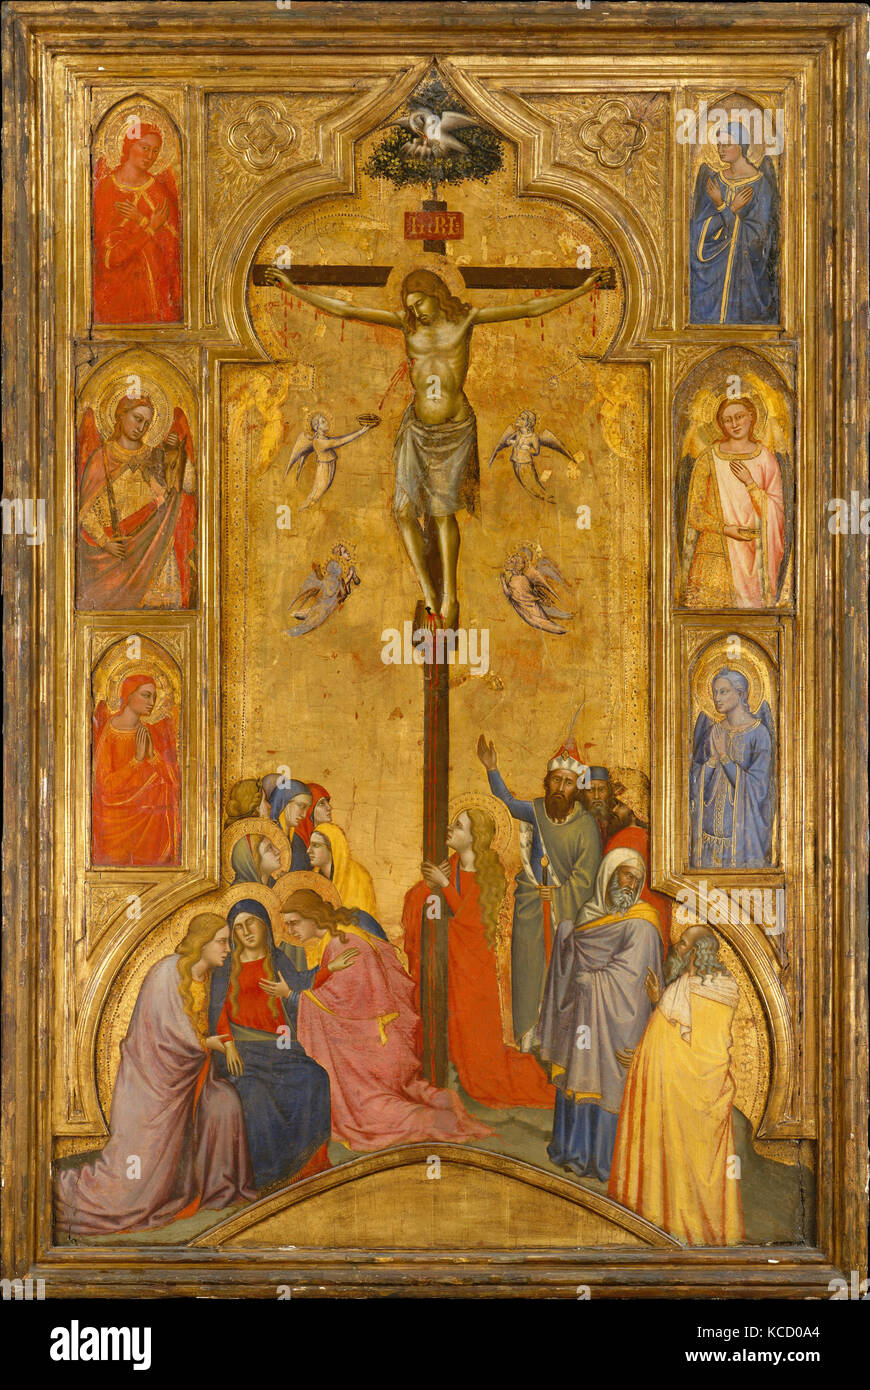 The Crucifixion, ca. 1365, Tempera on wood, gold ground, 54 1/8 x 32 1/4 in. (137.5 x 81.9 cm), Paintings, Andrea di Cione Stock Photo